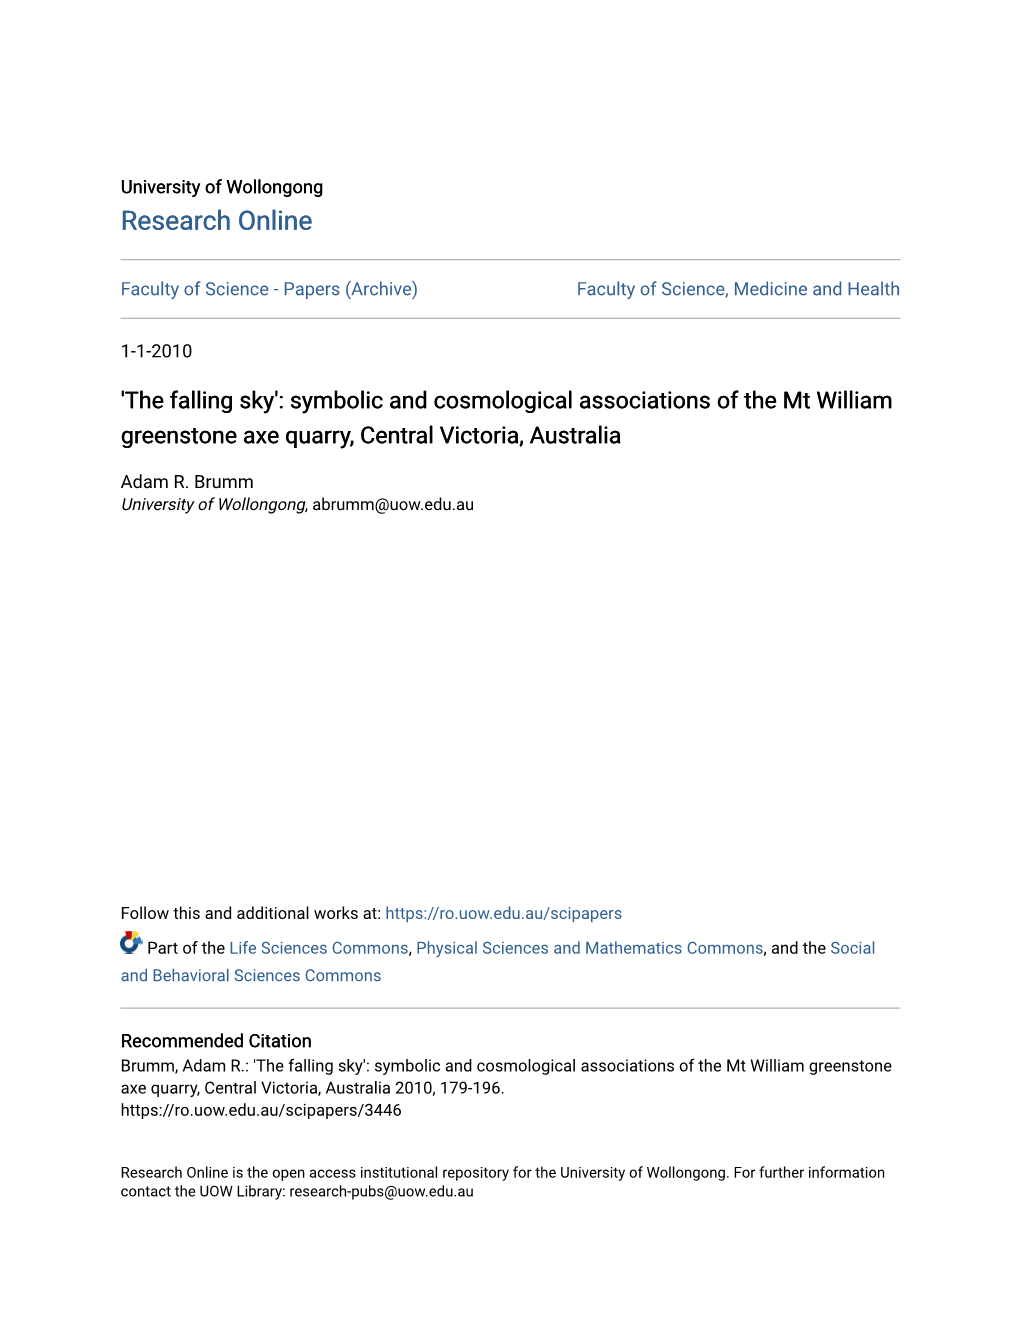 'The Falling Sky': Symbolic and Cosmological Associations of the Mt William Greenstone Axe Quarry, Central Victoria, Australia